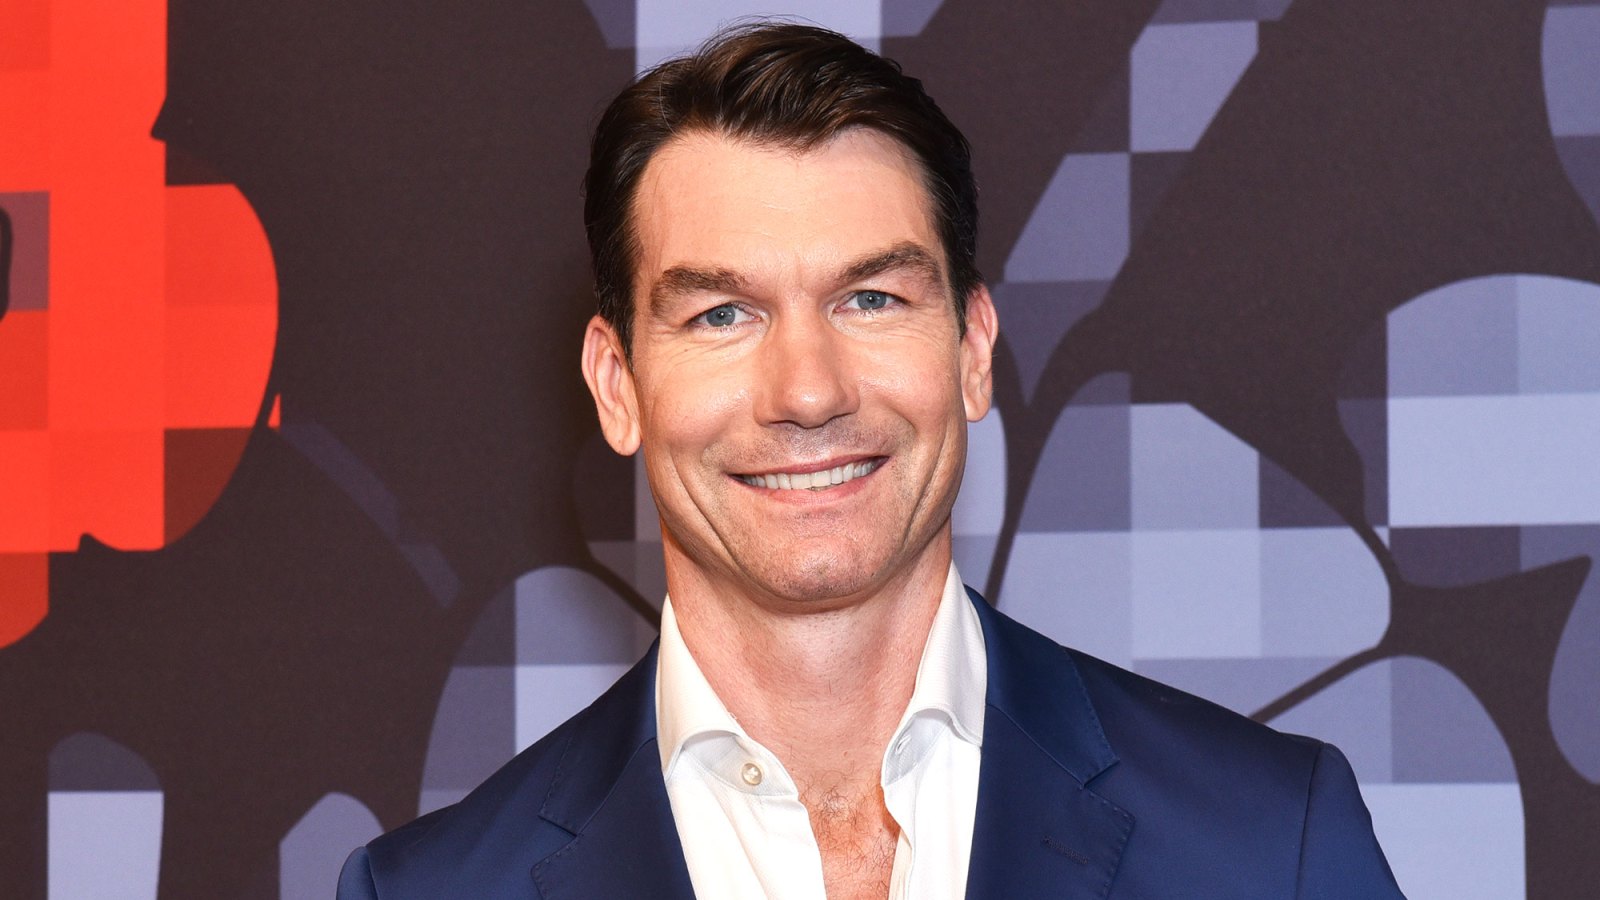 Jerry O'Connell: 25 Things You Don't Know About Me